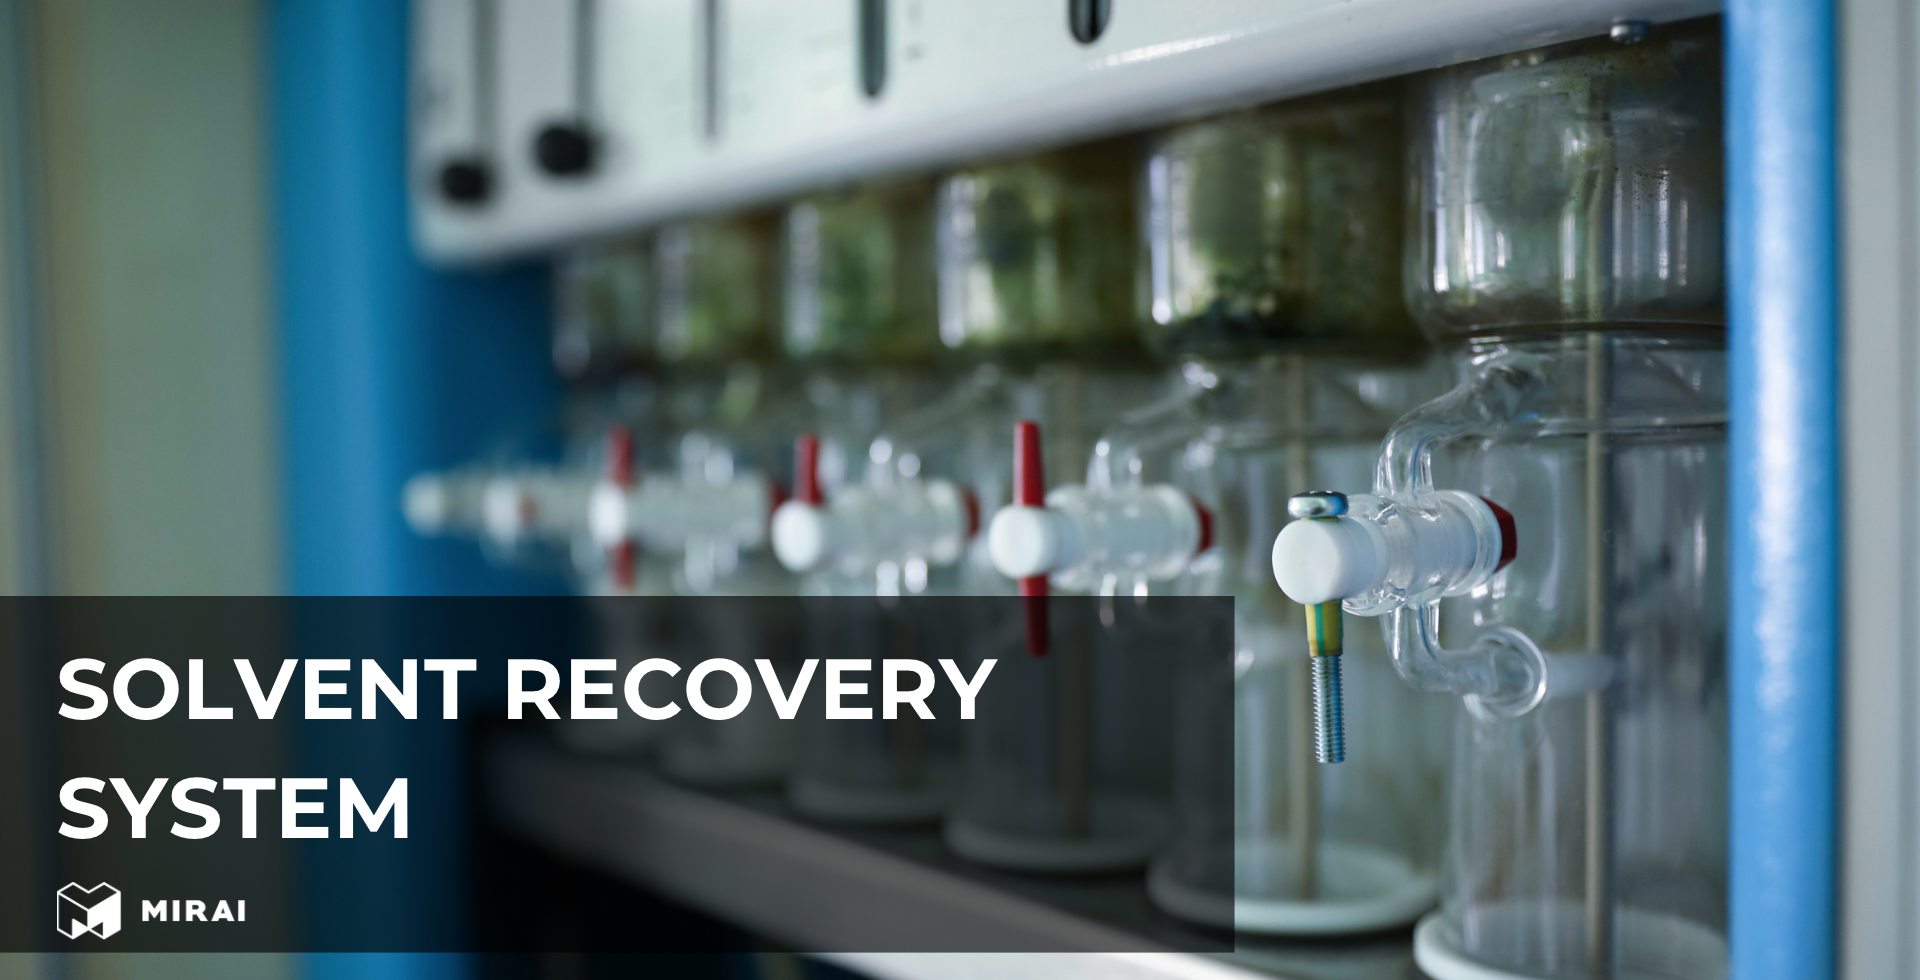 Solvent recovery system